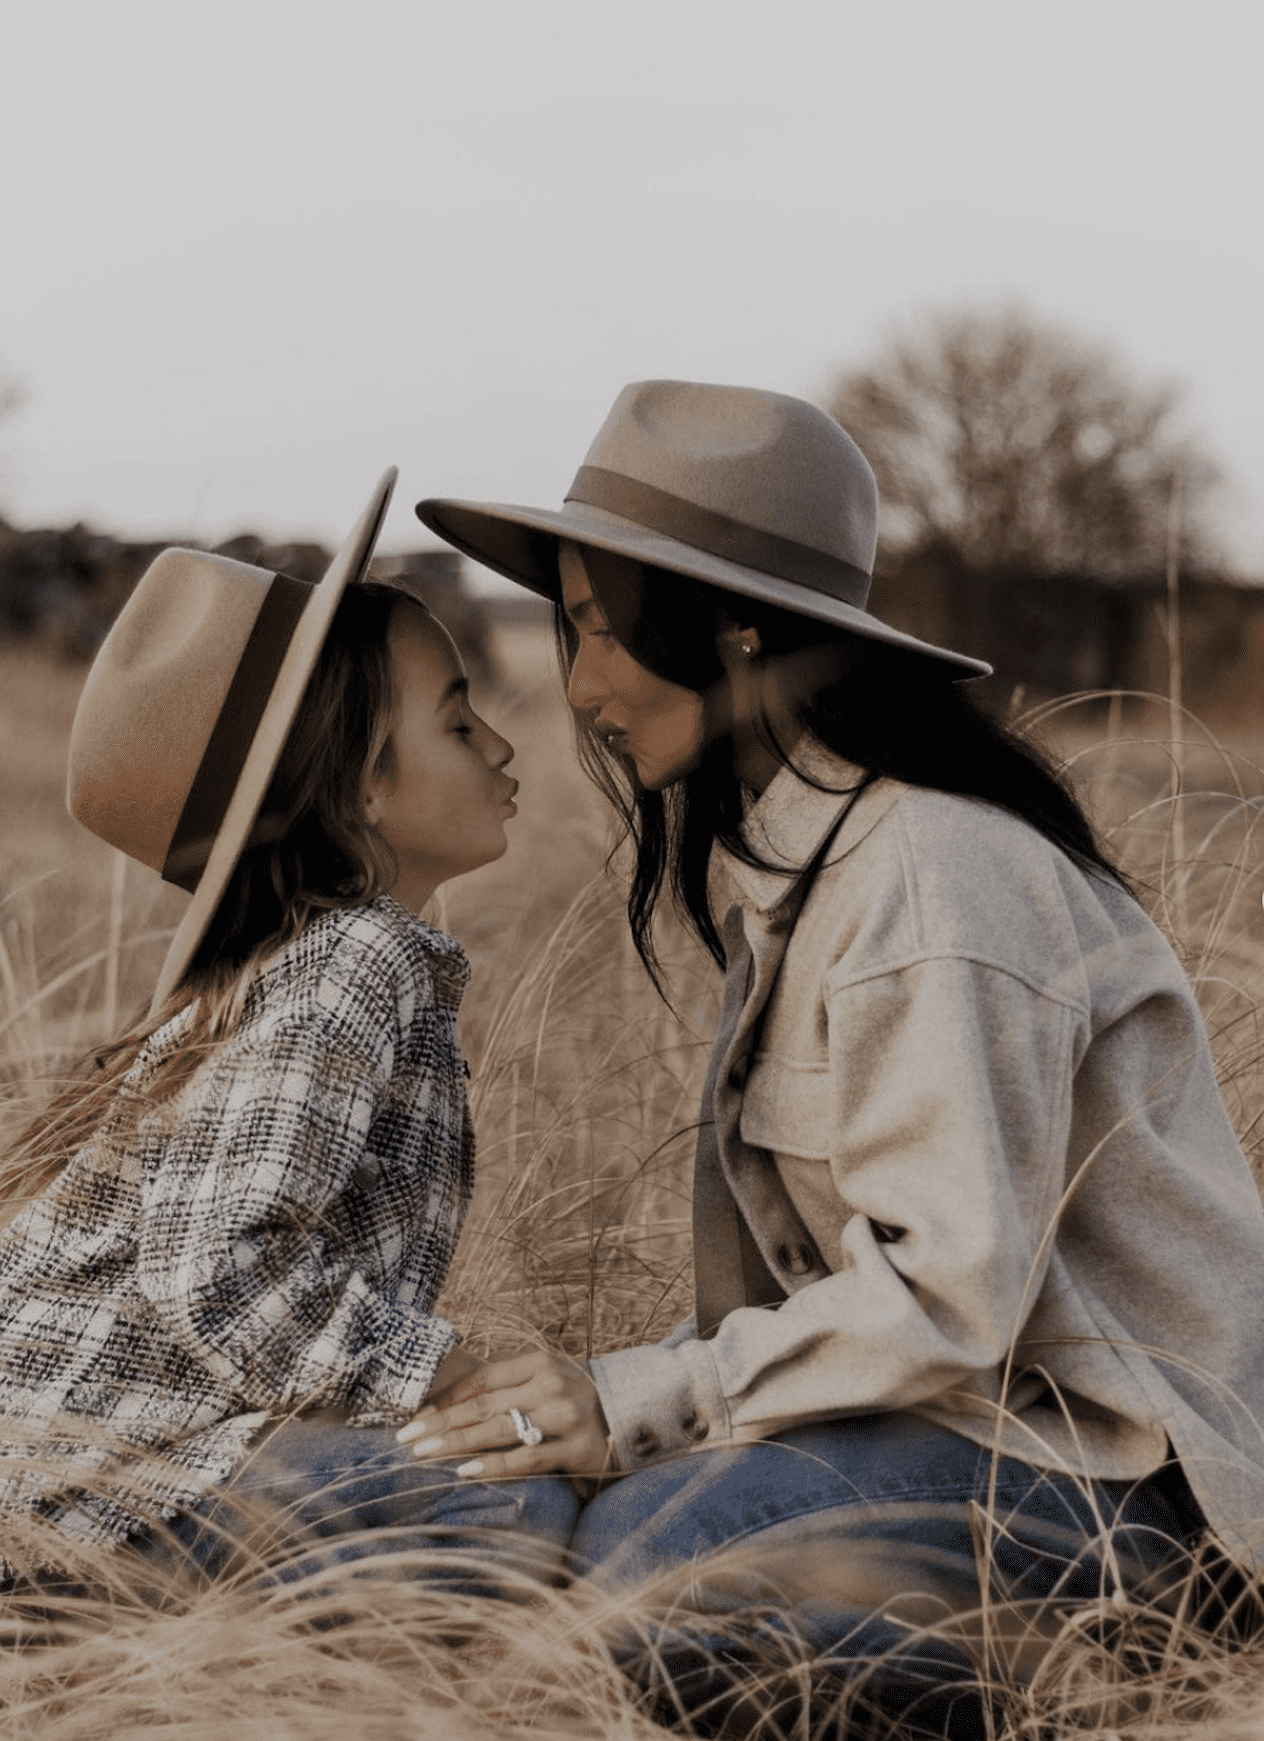 image of a woman and her daughter in a grassy field wearing wool fedora hats, shirt jackets, and jeans, looking at each other lovingly